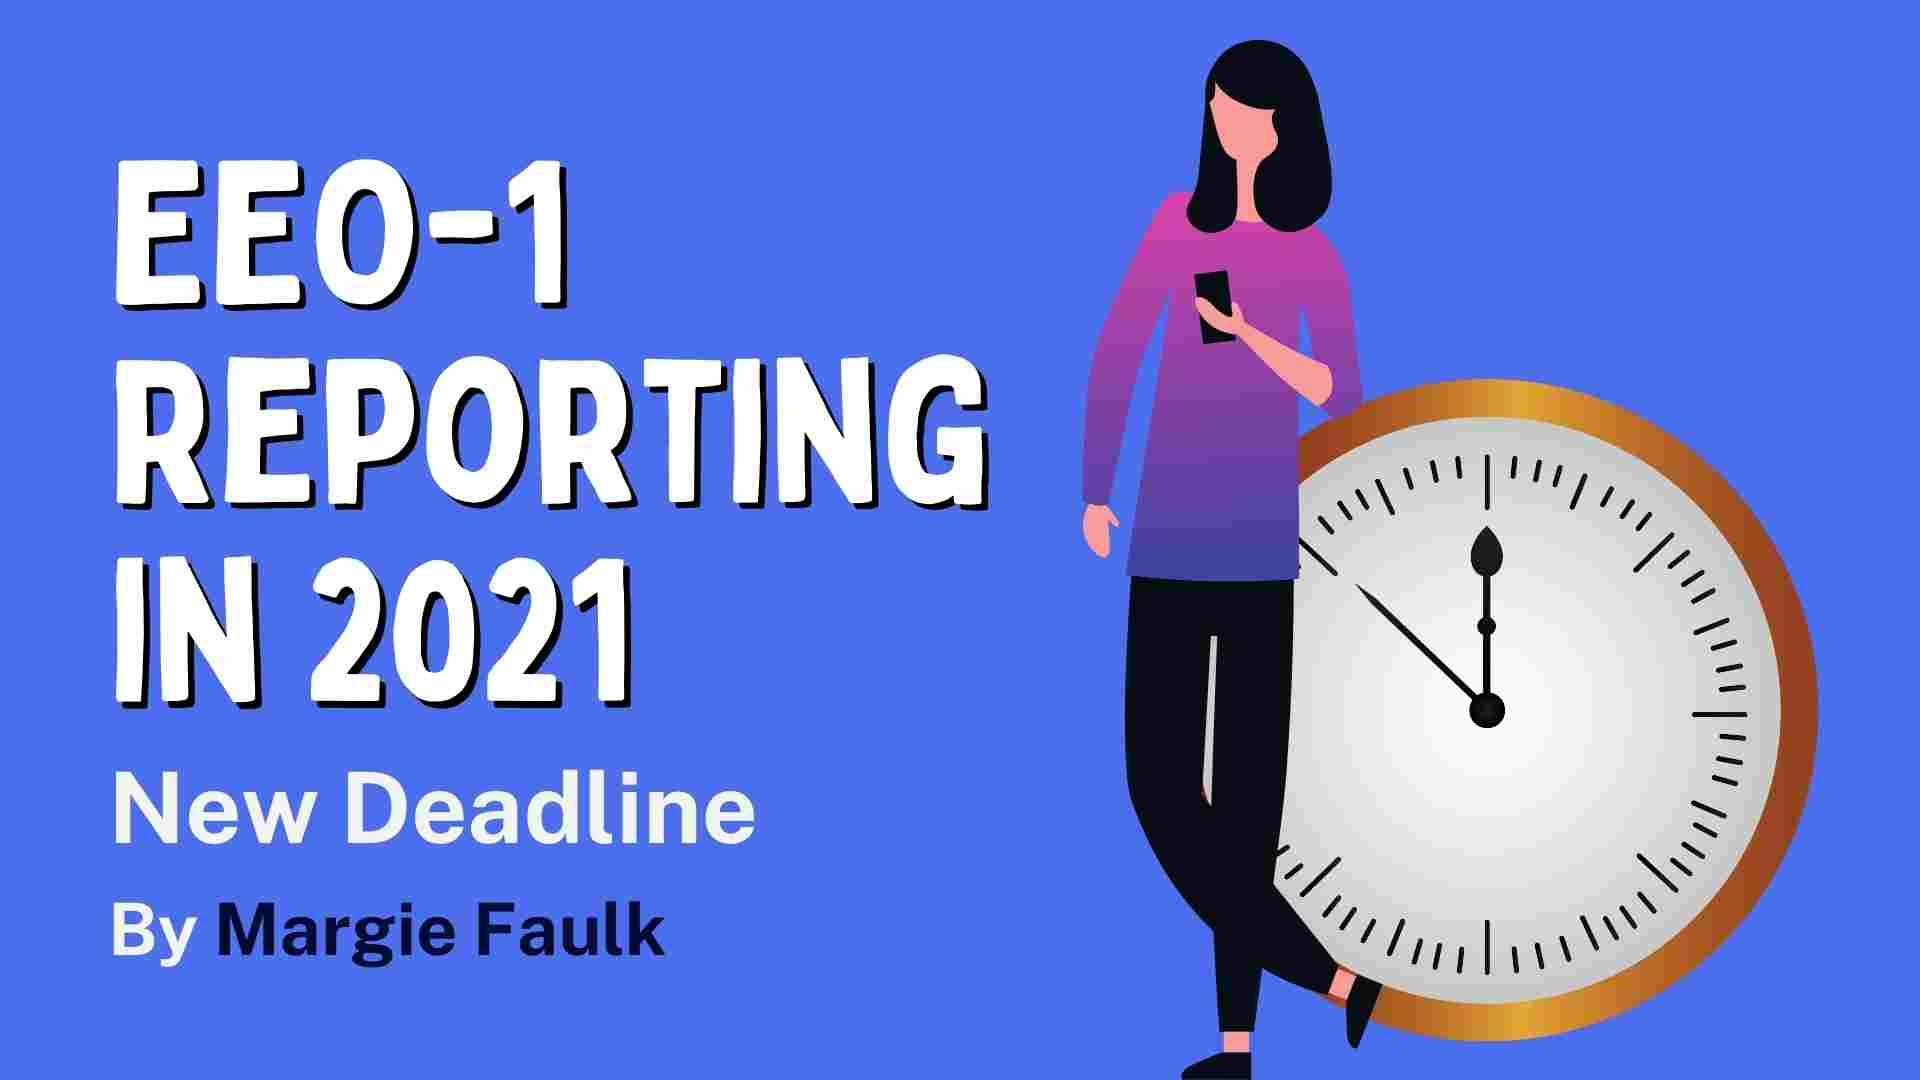 EEO1 Reporting in 2021 New Deadline! Corporate Compliance Insights